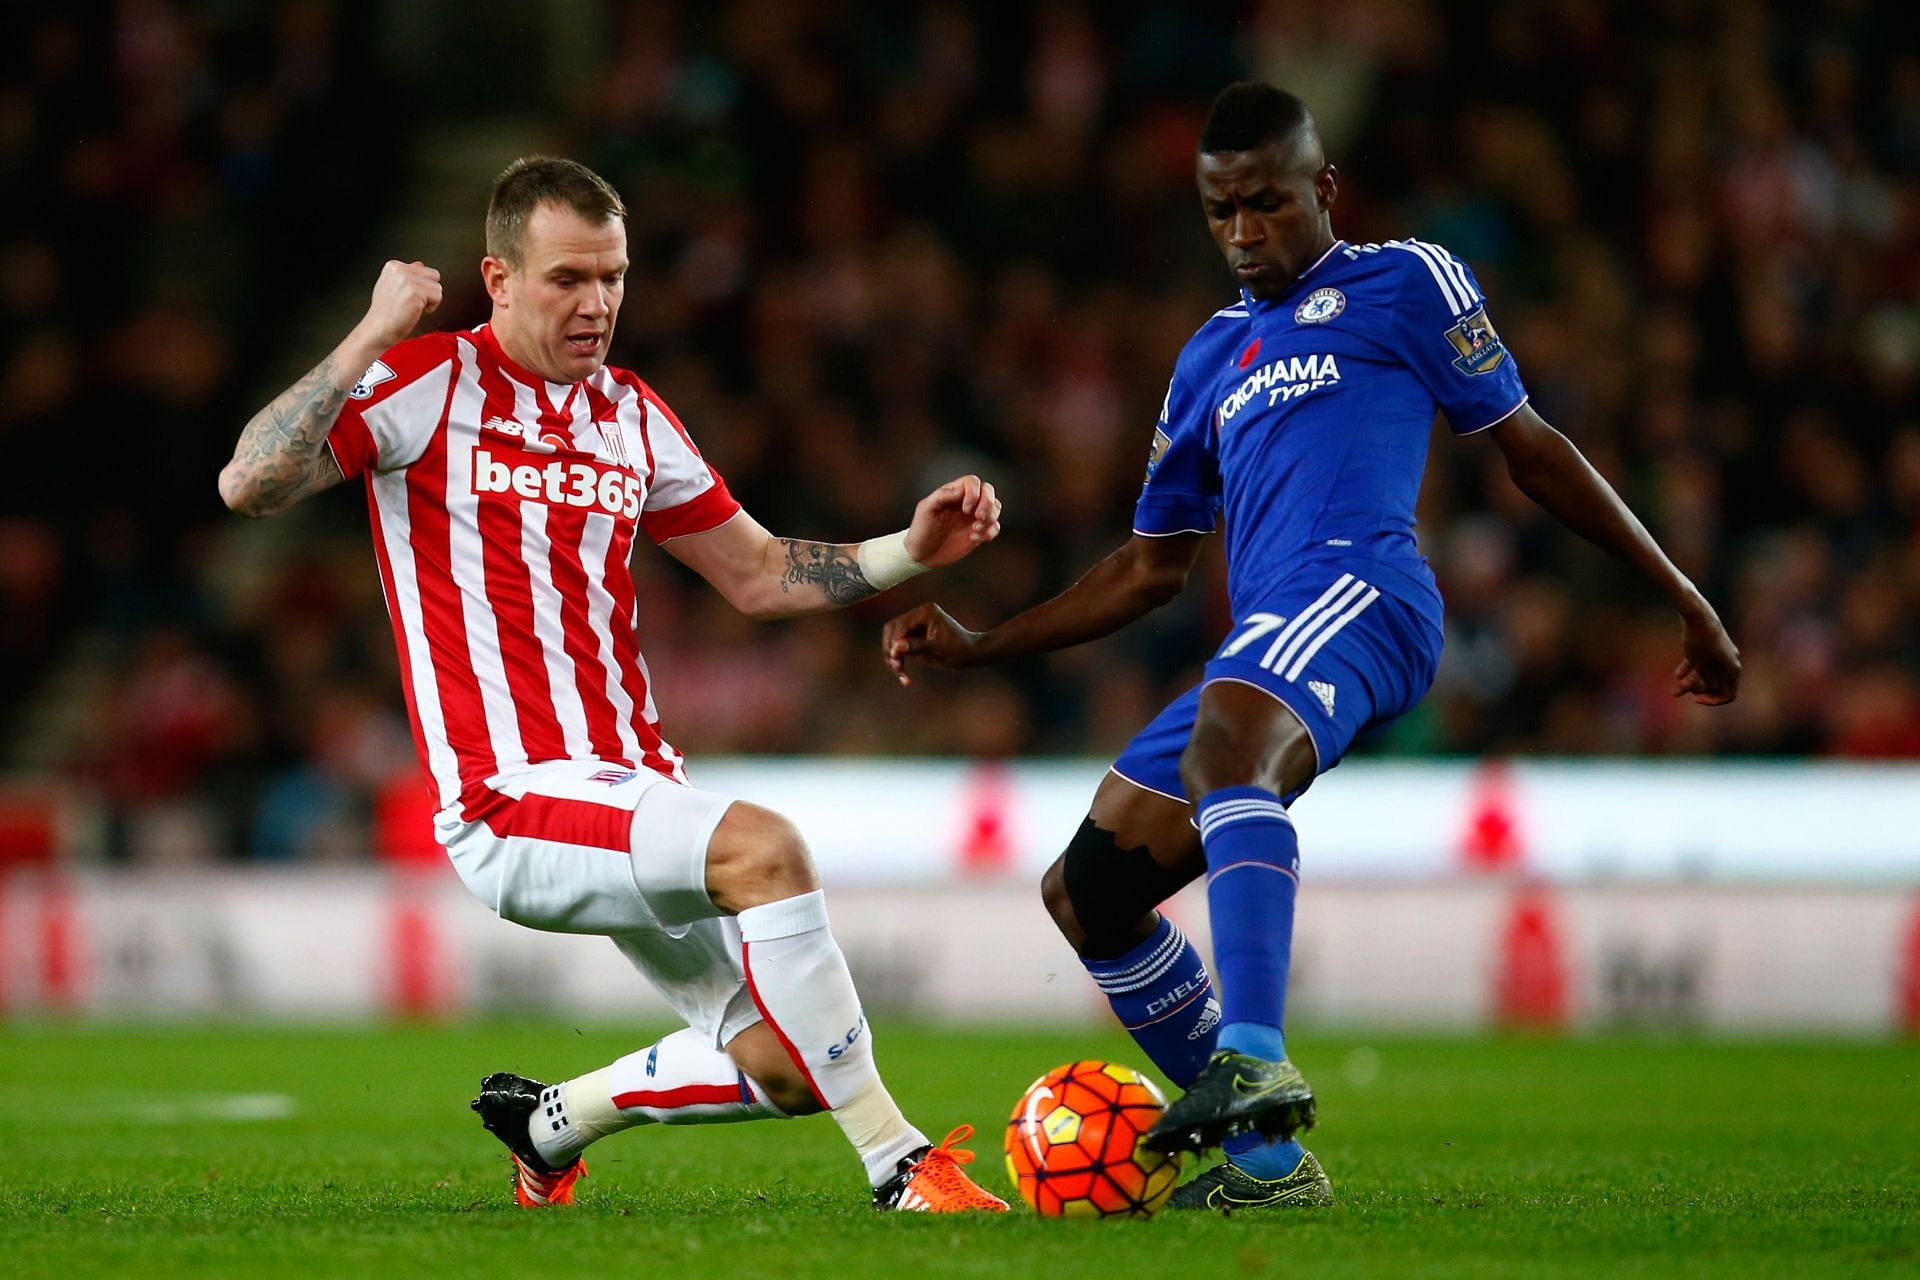 Ramires (right) in action for Chelsea against Stoke City